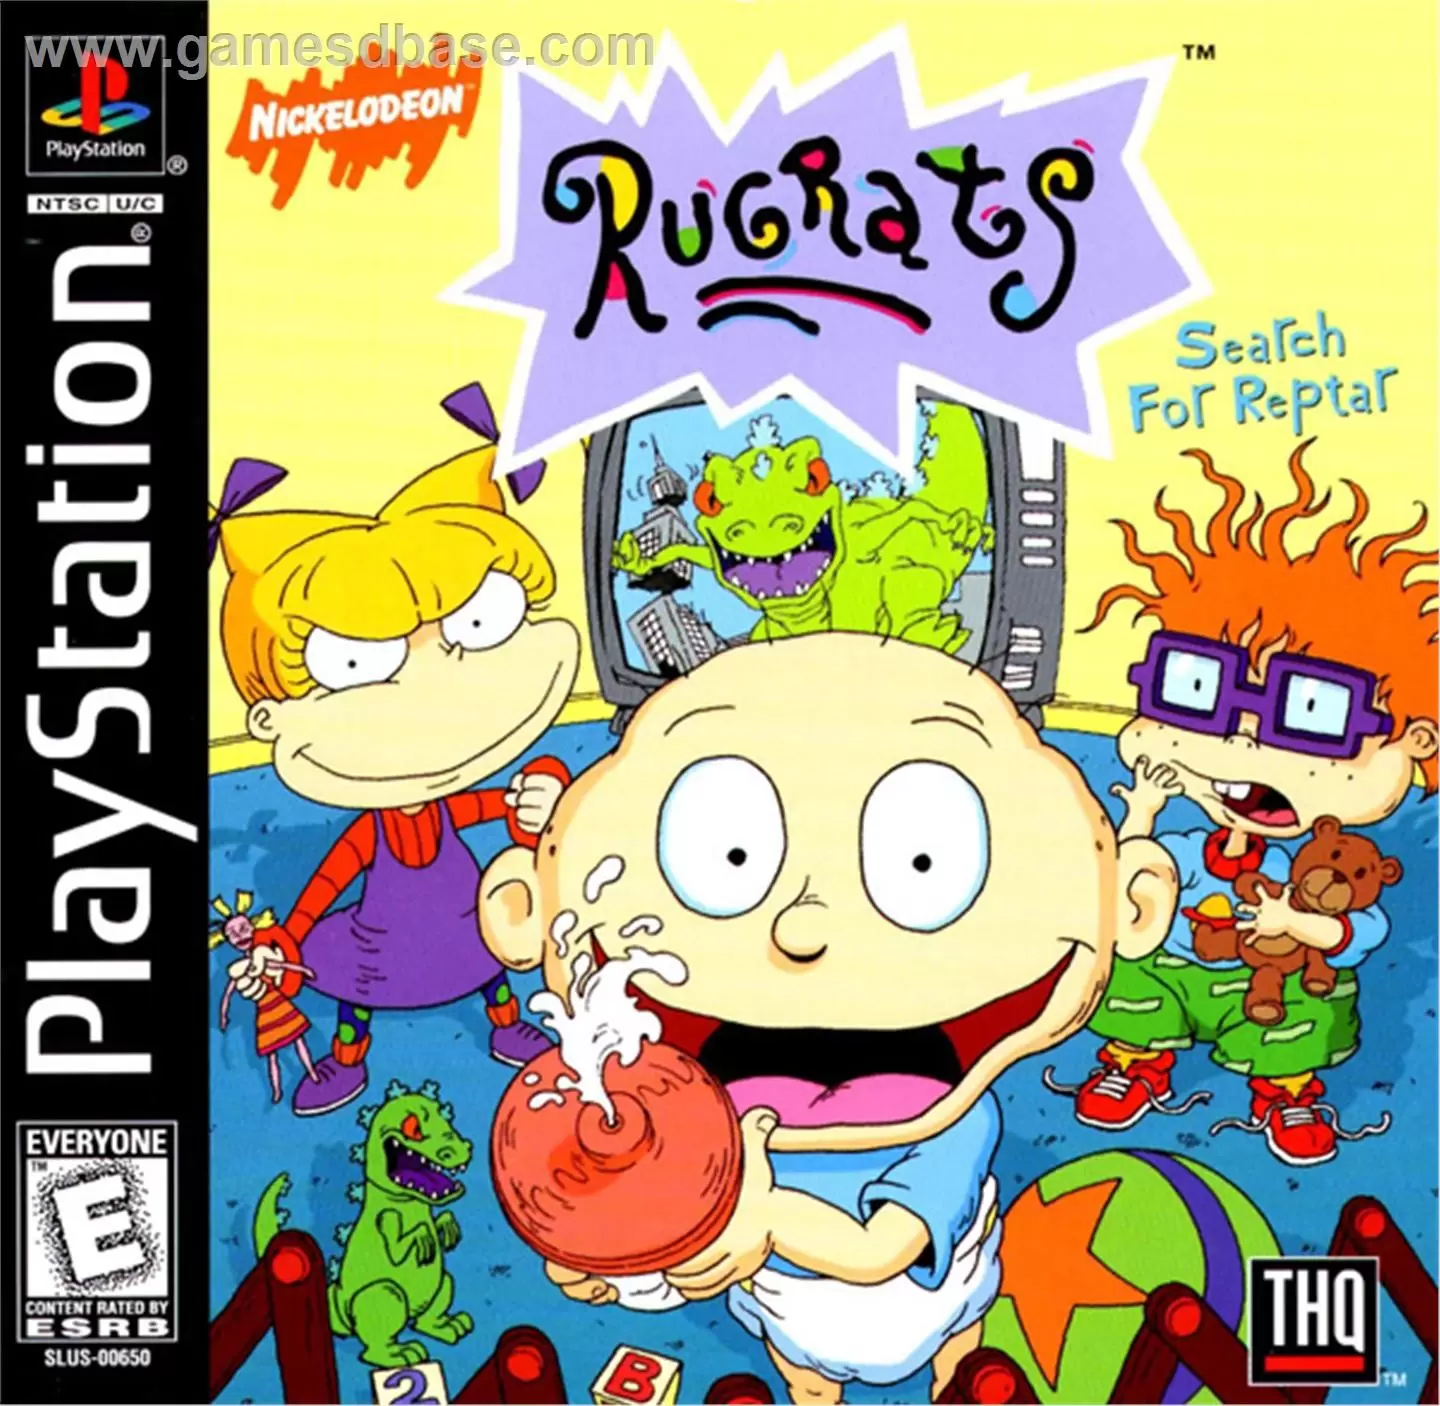 Playstation games - Rugrats: The Search For Reptar